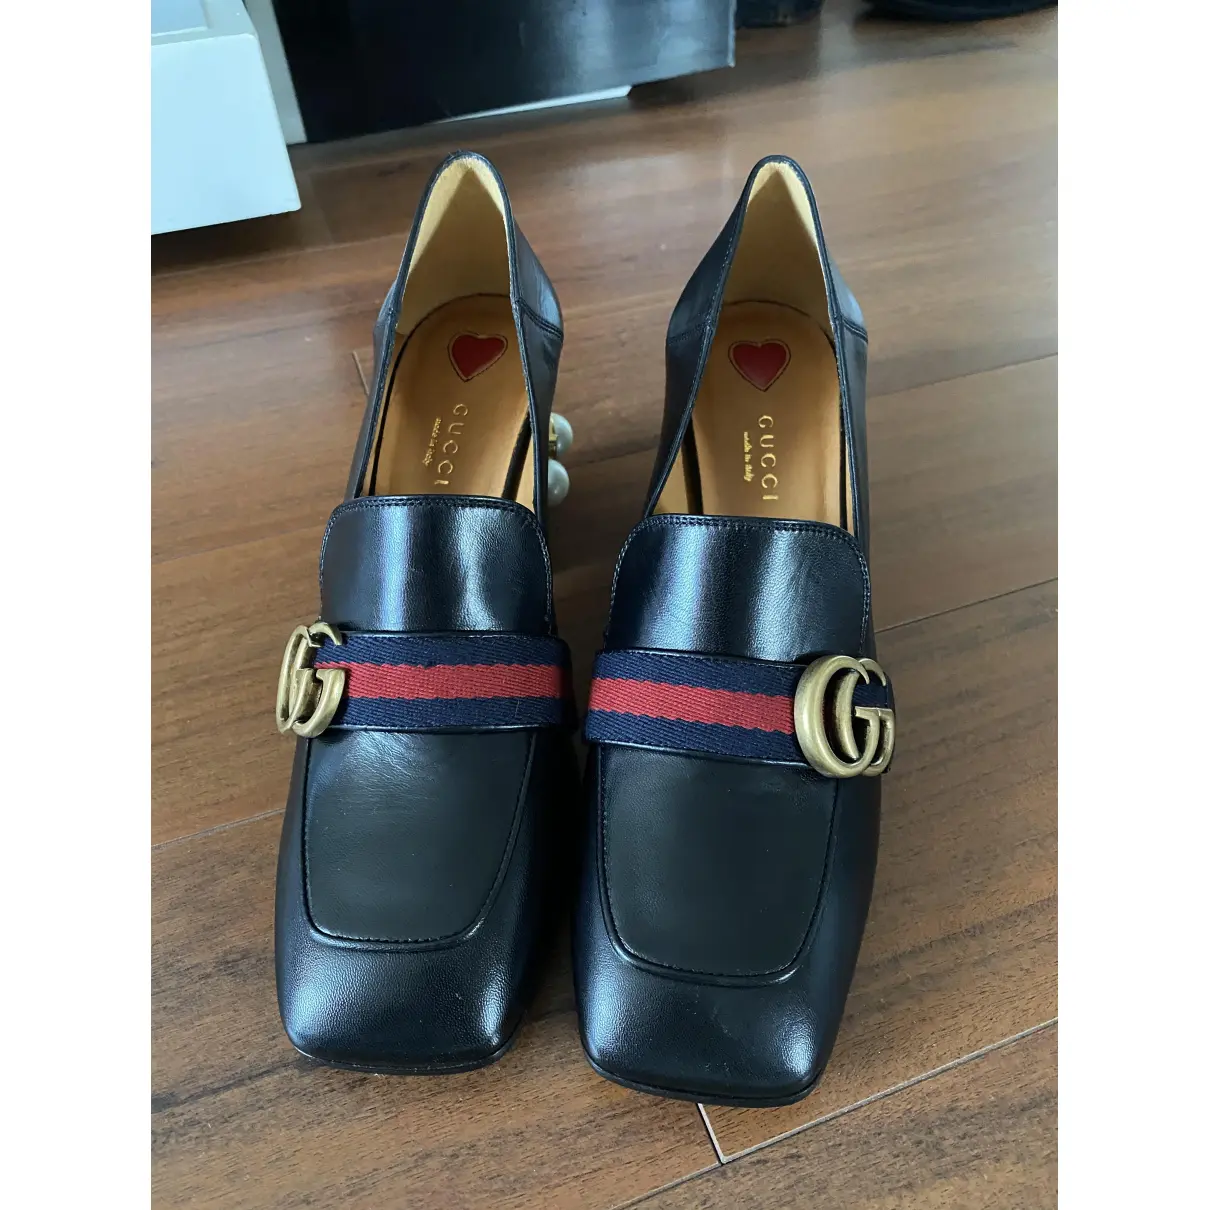 Buy Gucci Malaga leather flats online